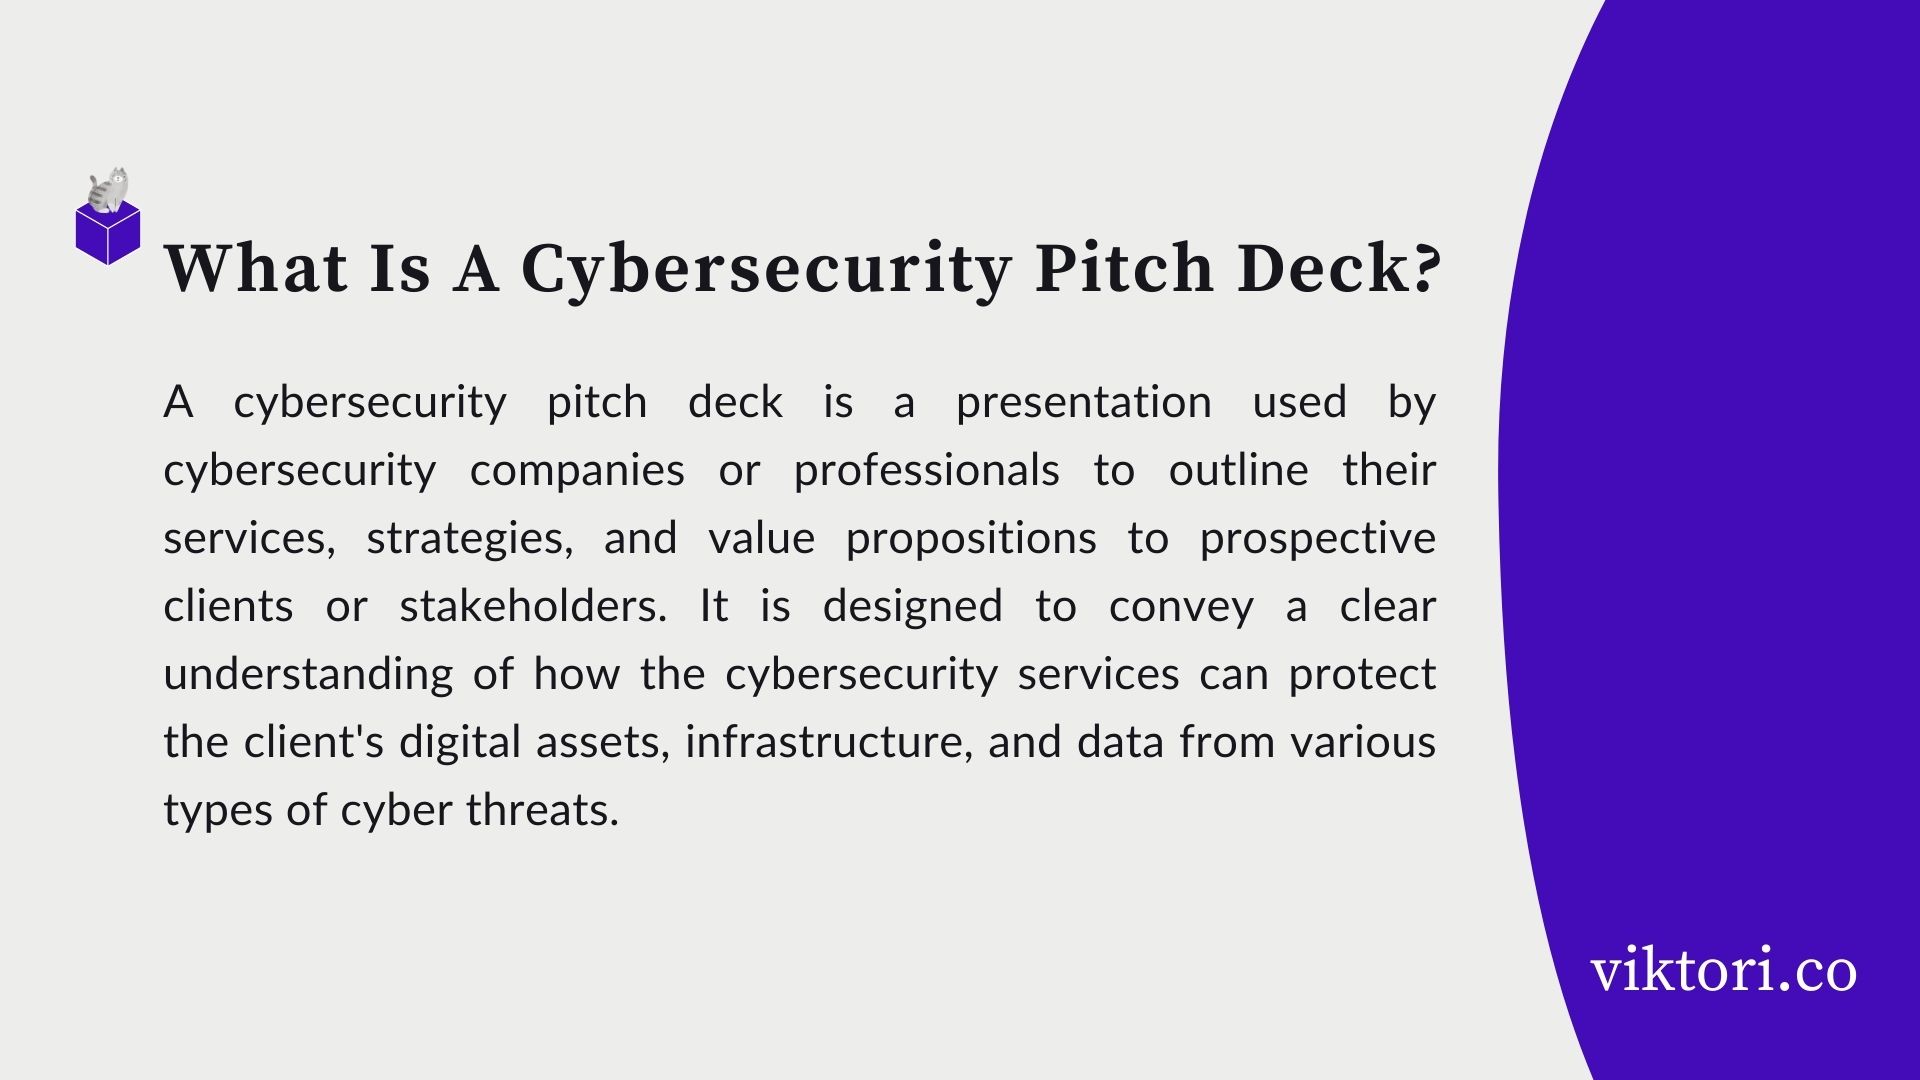 cyber security pitch deck definition